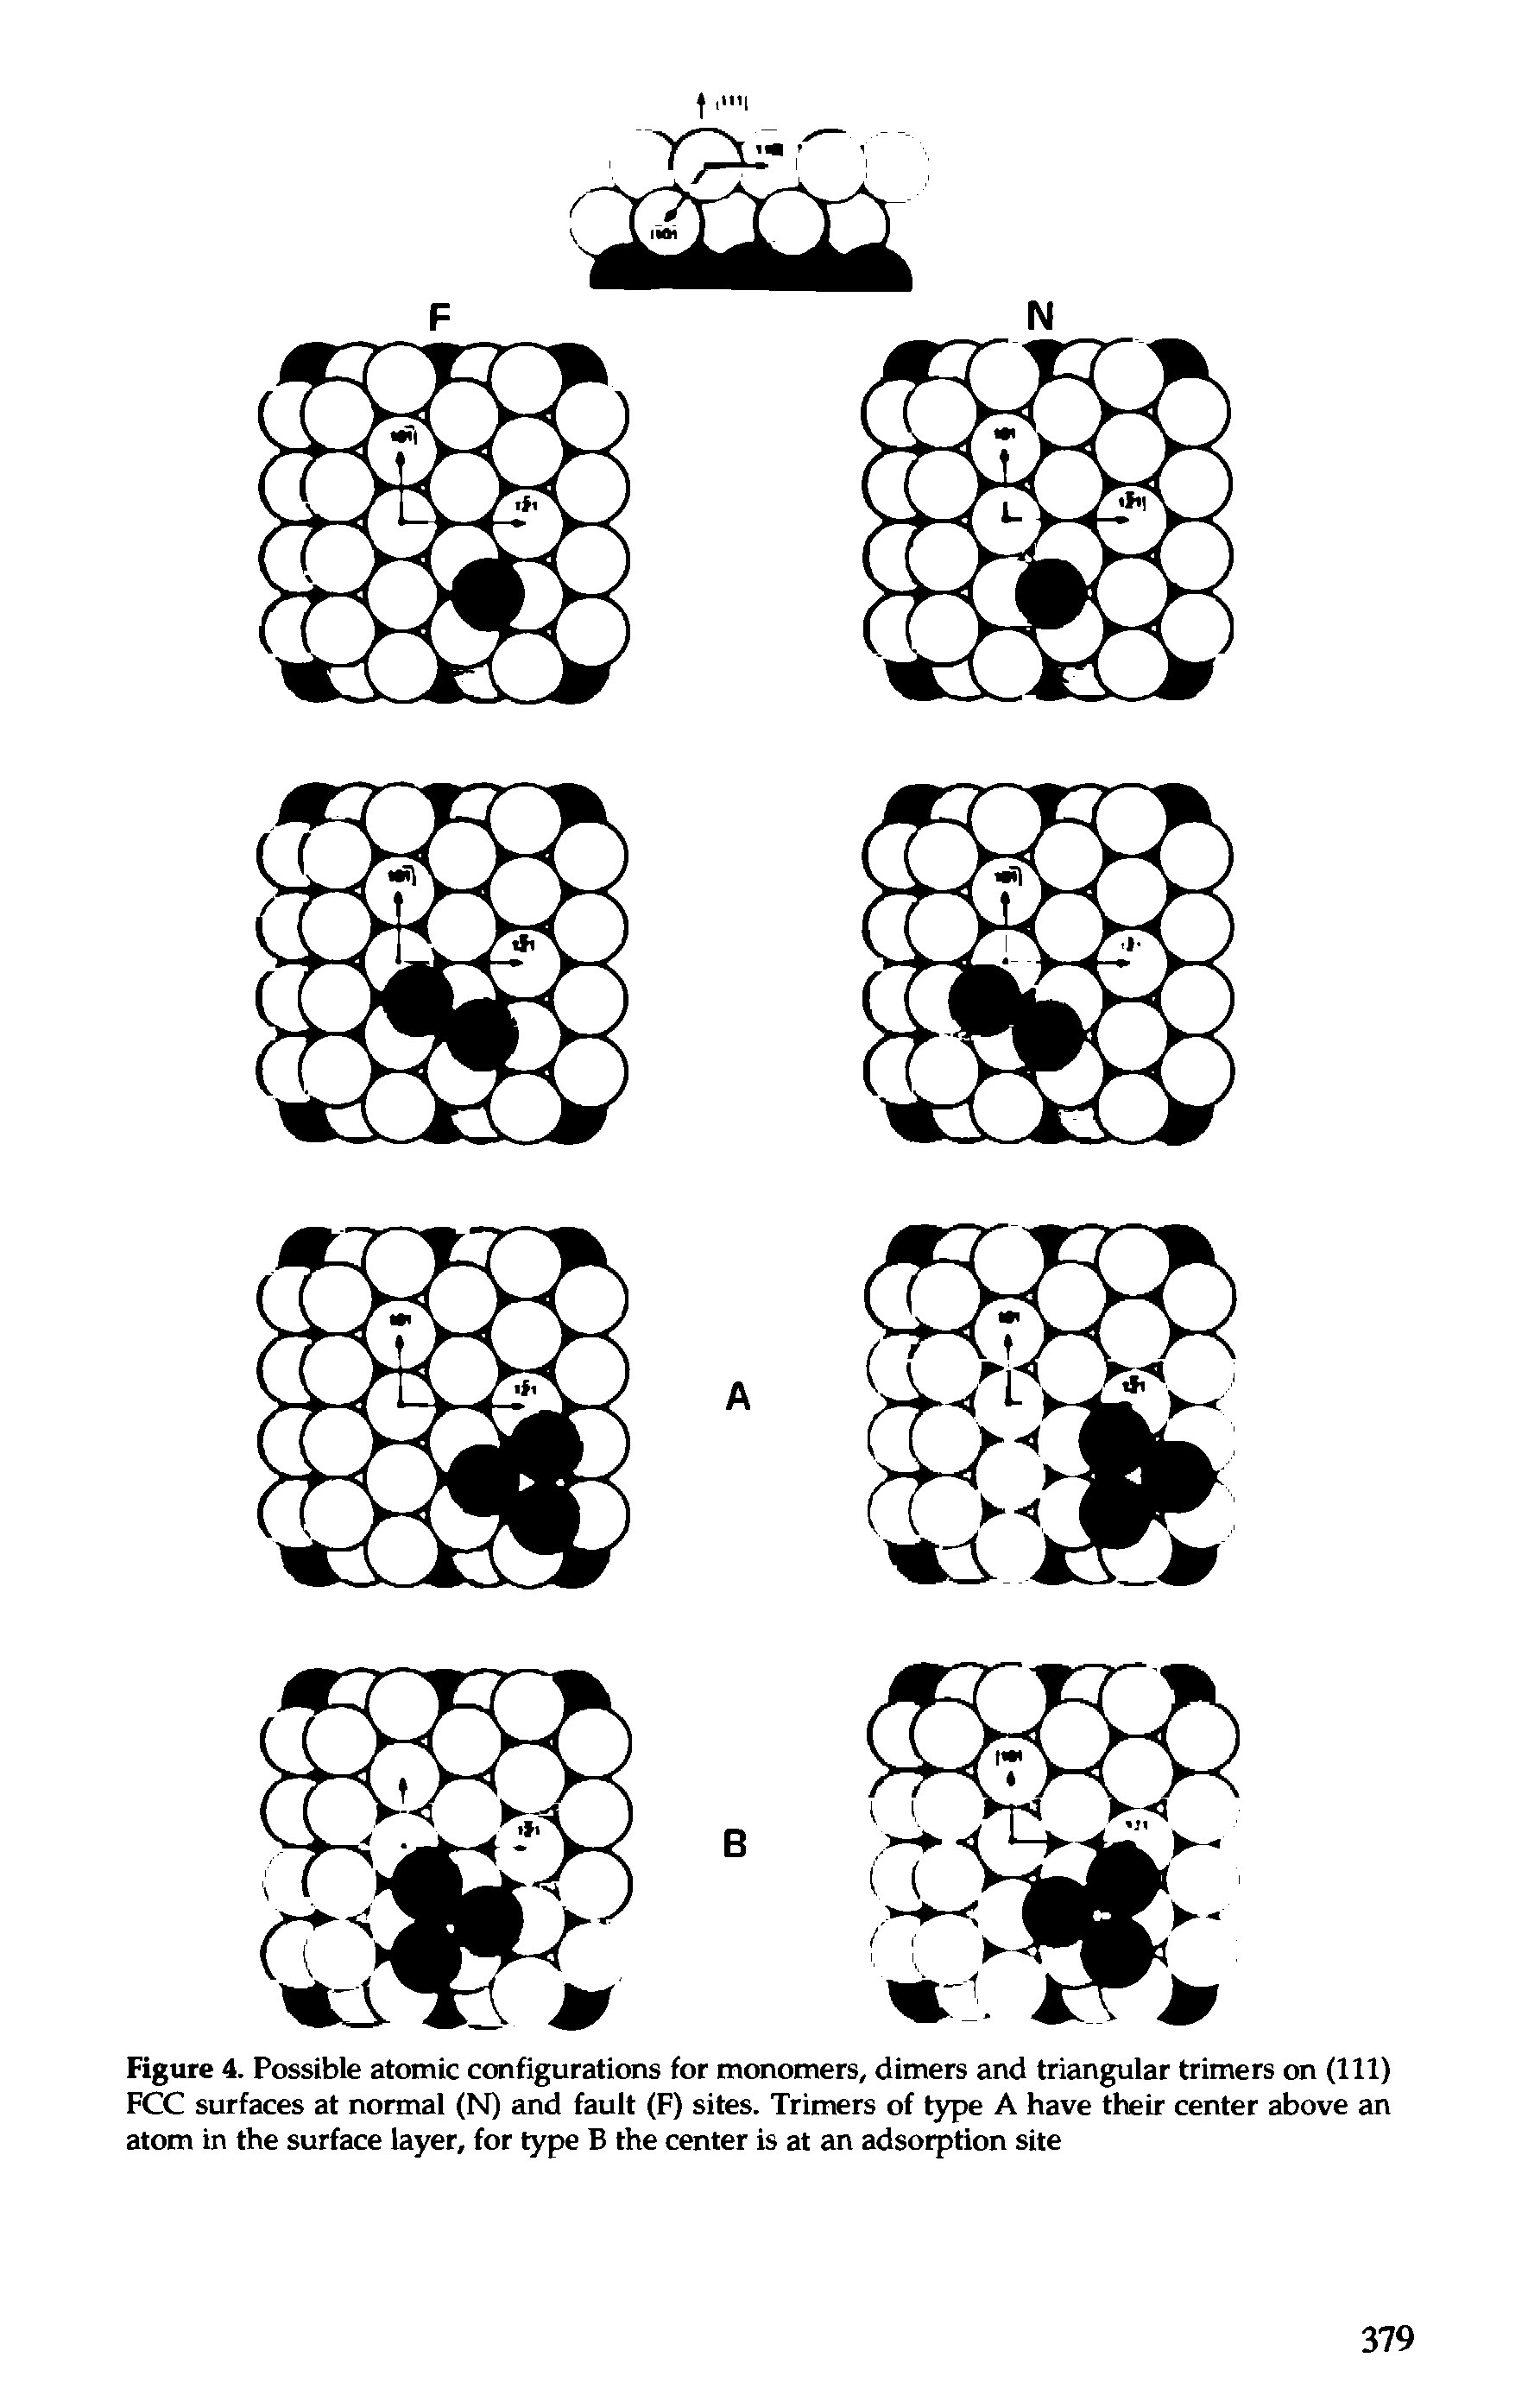 Figure 4. Possible atomic configurations for monomers, dimers and triangular trimers on (111) FCC surfaces at normal (N) and fault (F) sites. Trimers of type A have their center above an atom in the surface layer, for type B the center is at an adsorption site...